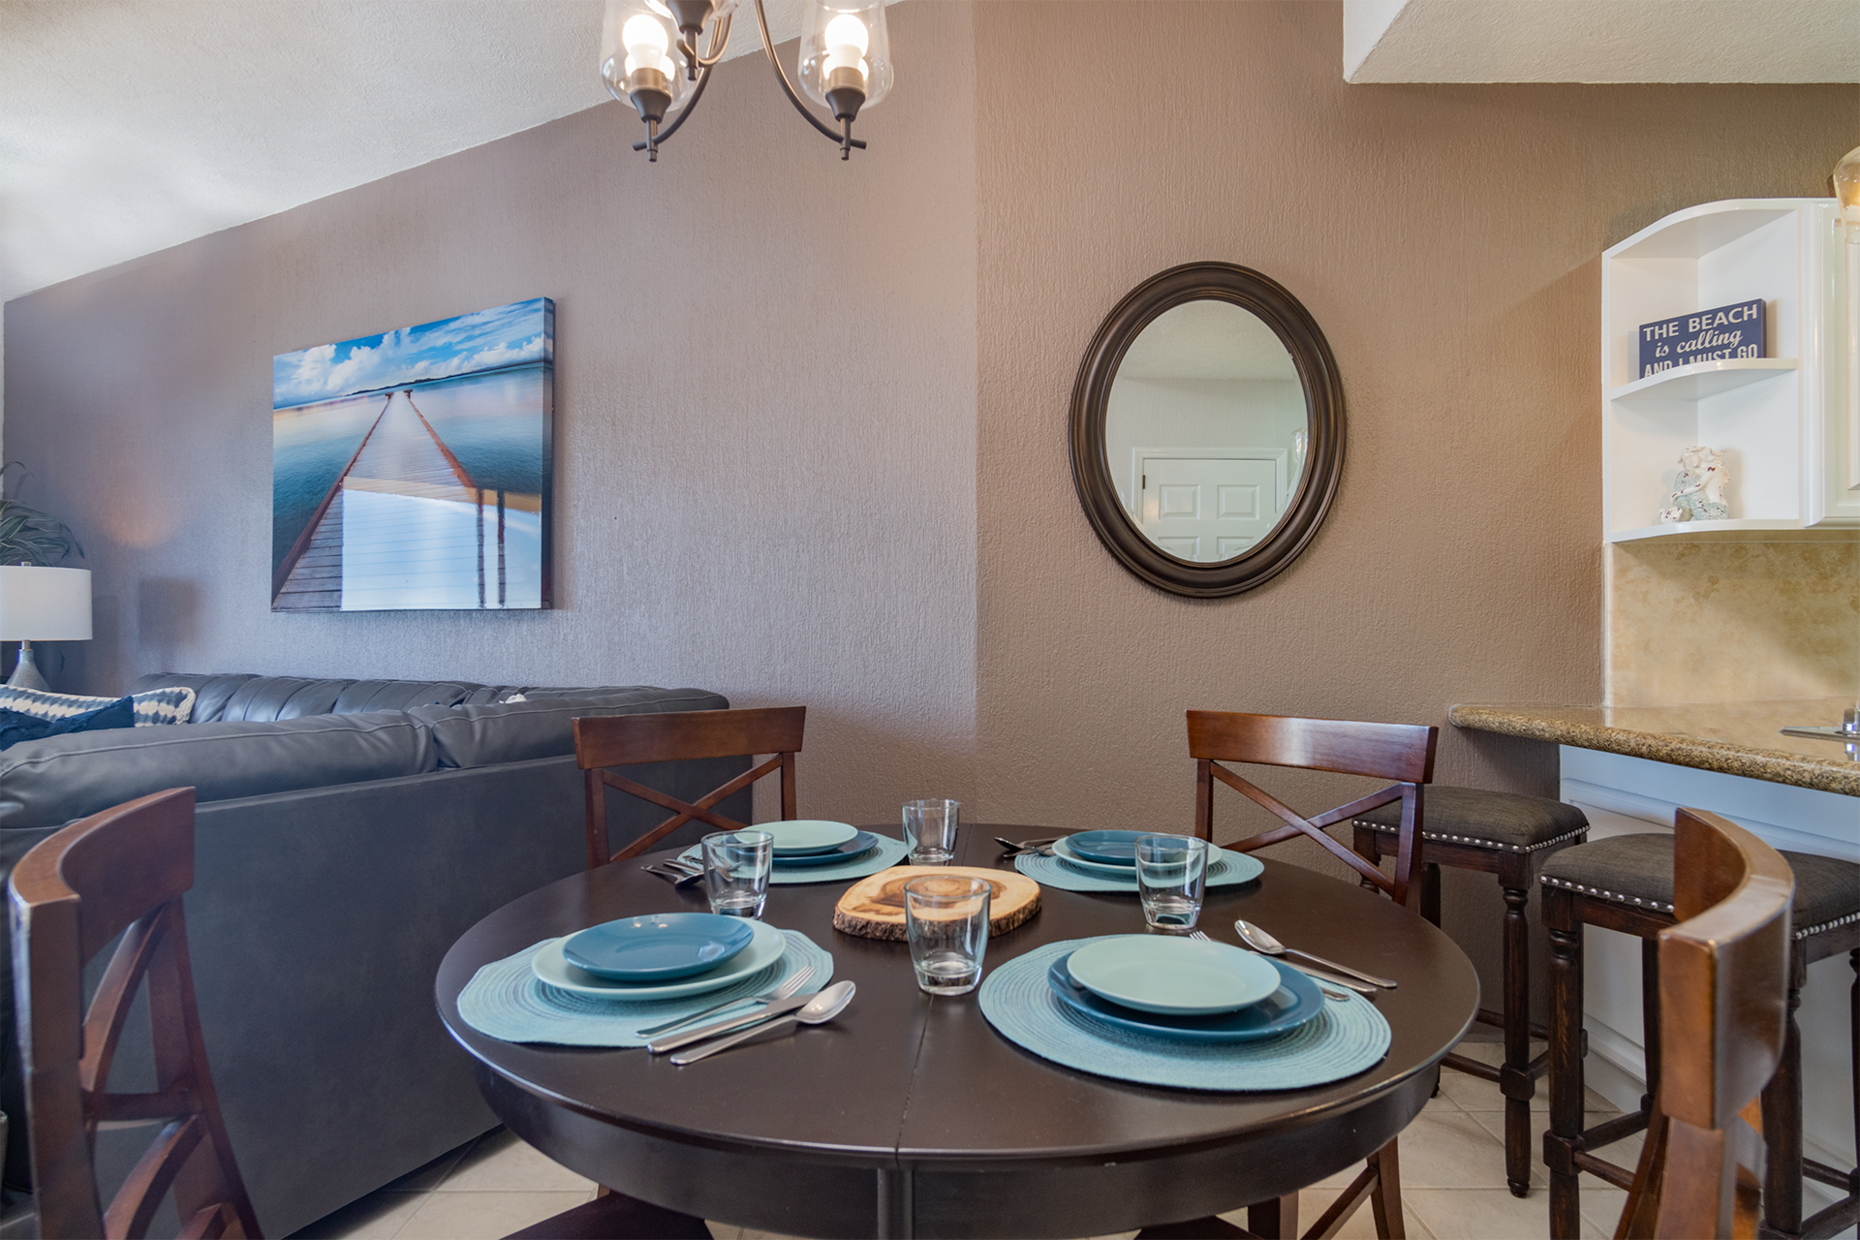 Plenty of room for everyone! The dining area includes 4 chairs and 4 counter stools.